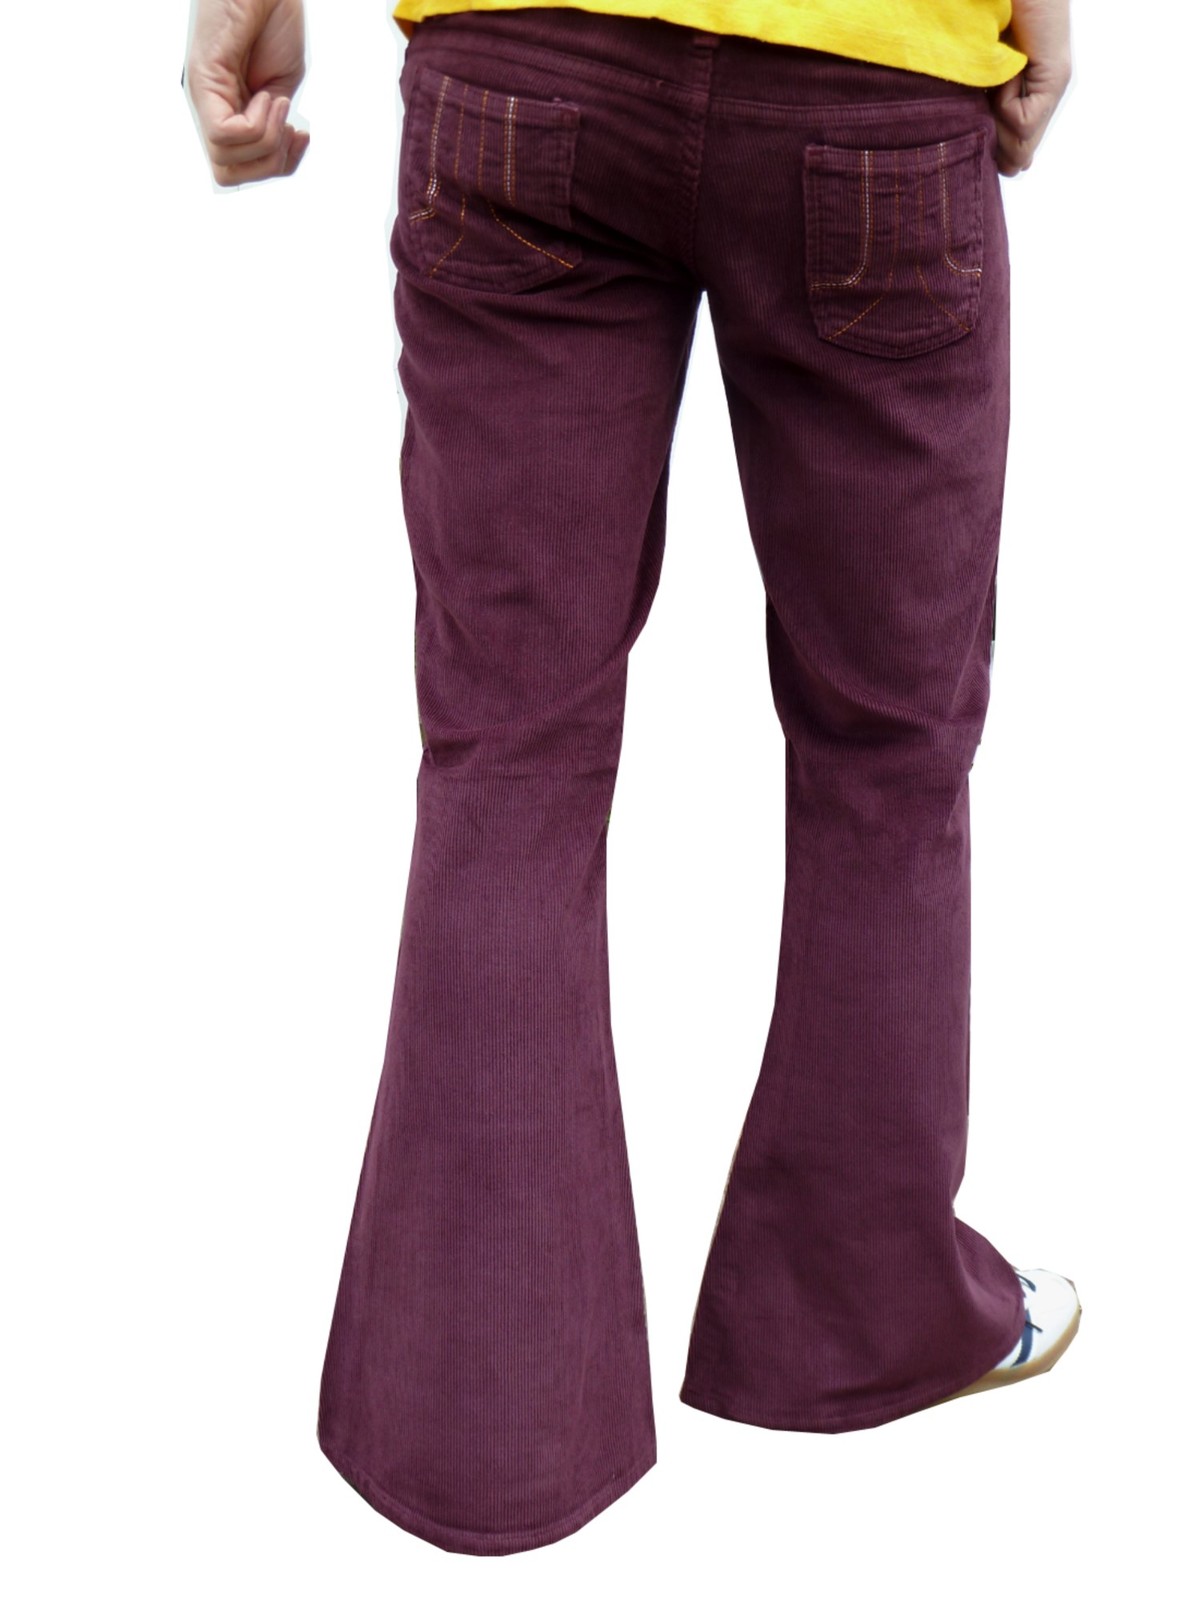 Mens Flares Burgundy Red Corduroy Flared Bell Bottoms Pants Hippie ...